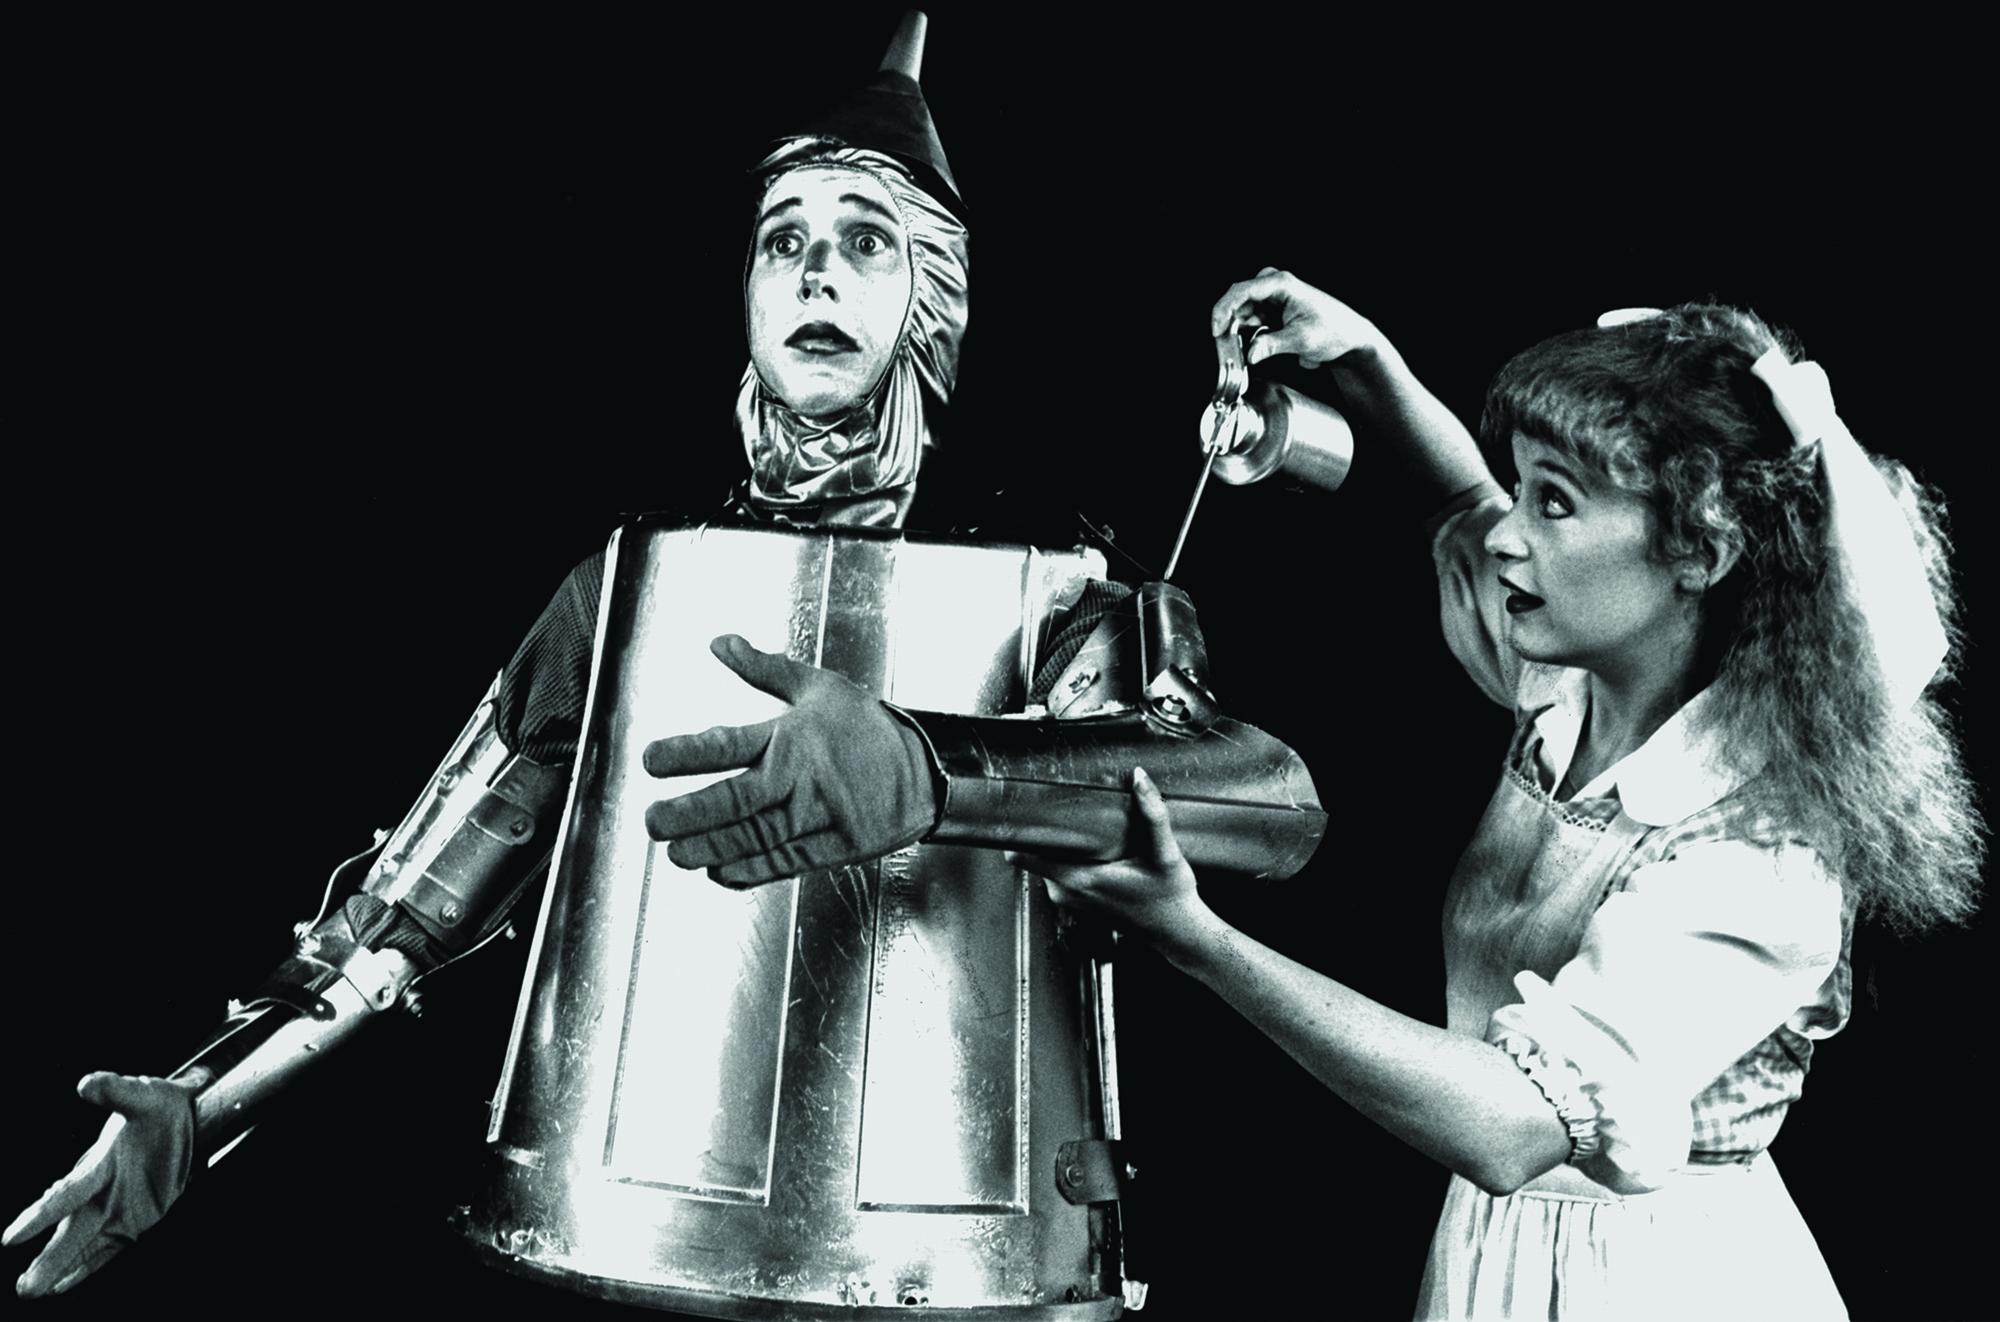 Dorothy giving the Tin Man a shot of oil in the arm